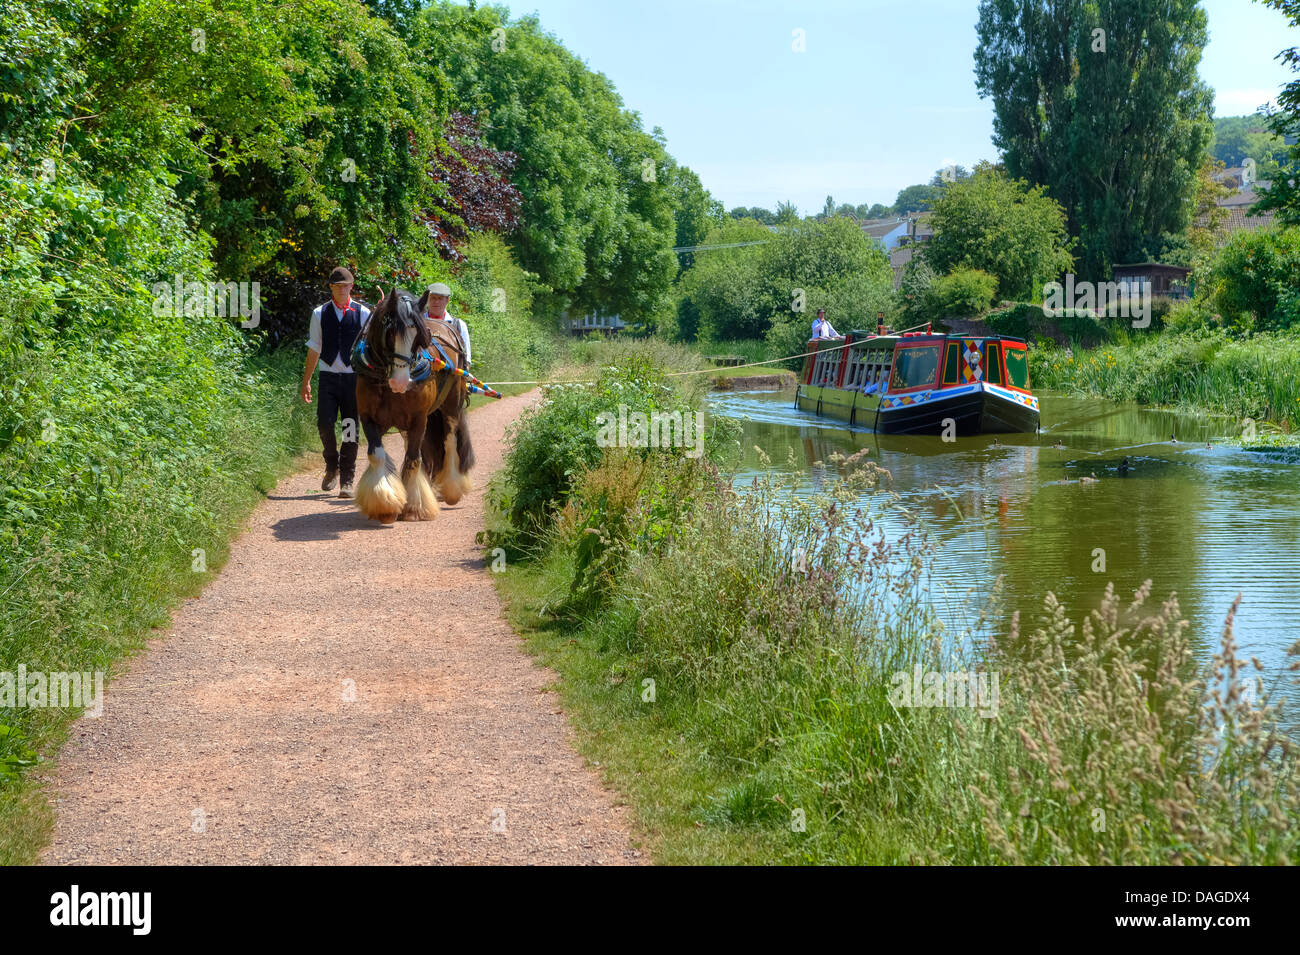 Horse drawn barge on the Great Western Canal, Tiverton, Devon, England, United Kingdom Stock Photo